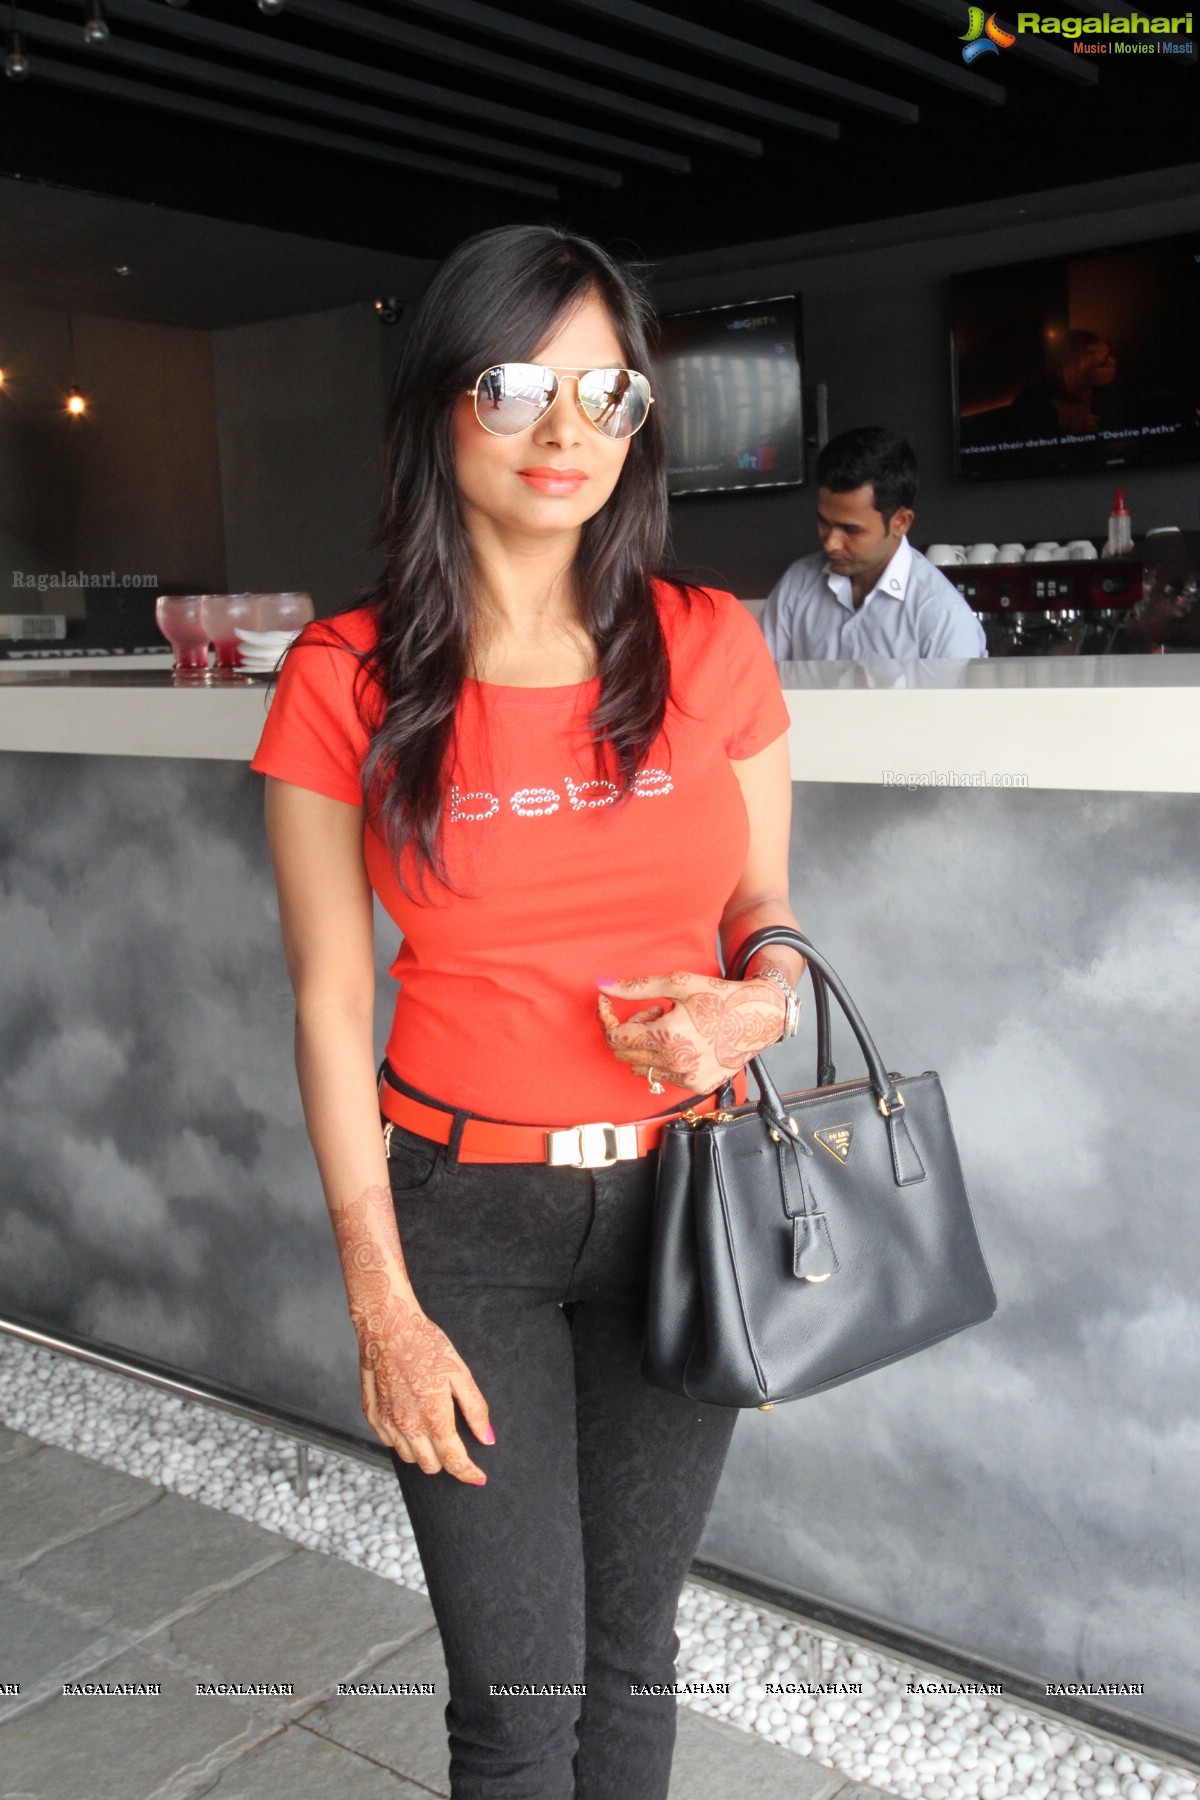 Orange Feathers - Monsoon Promotion at Air Cafe Lounge, Hyderabad